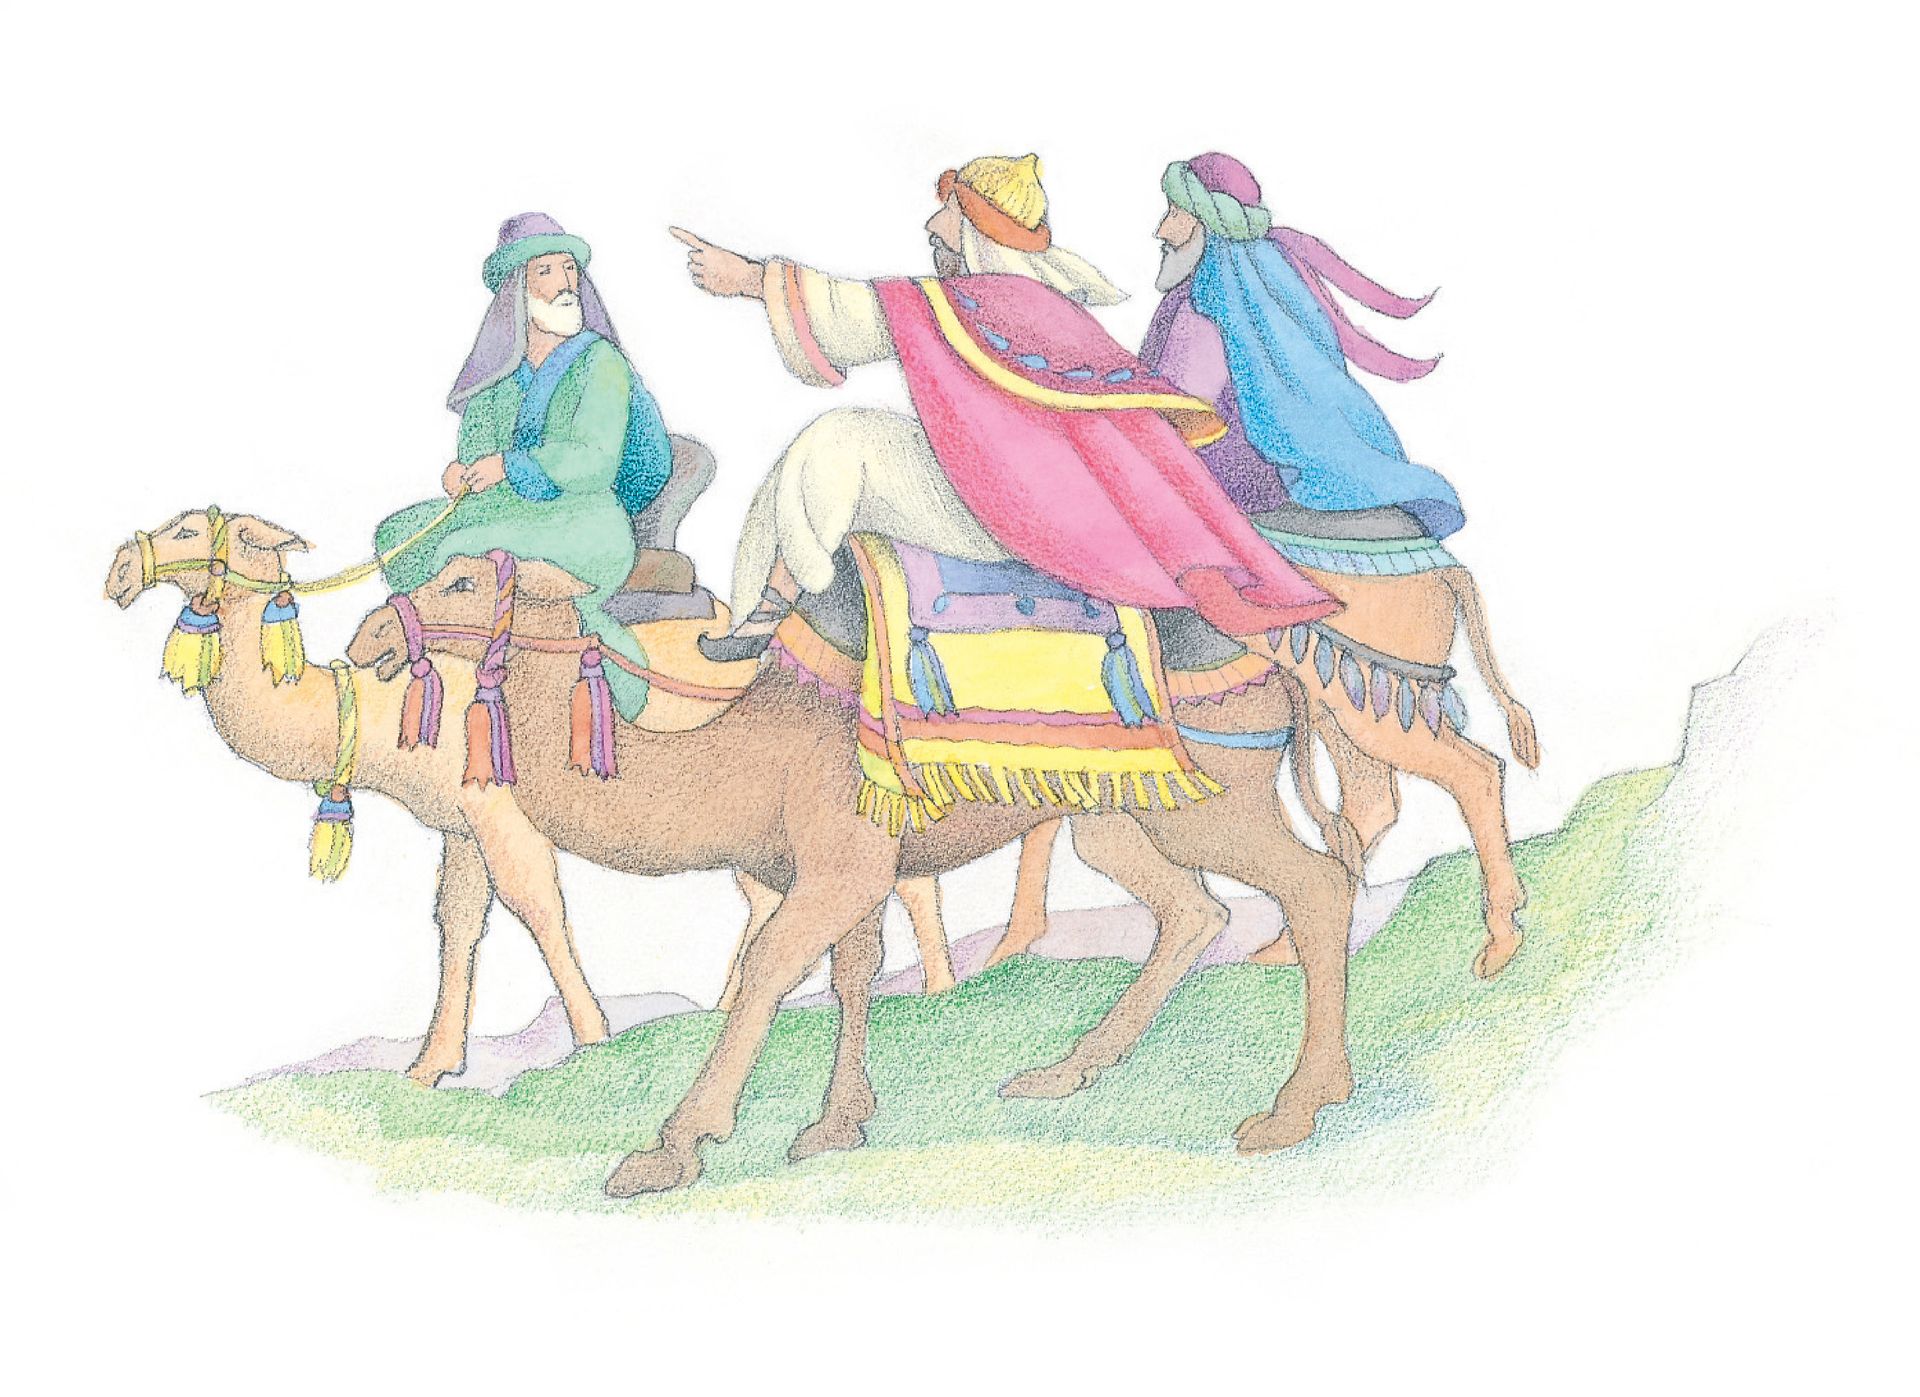 The Wise Men make their journey to see the Christ child. From the Children’s Songbook, page 53, “The Nativity Song”; watercolor illustration by Phyllis Luch.